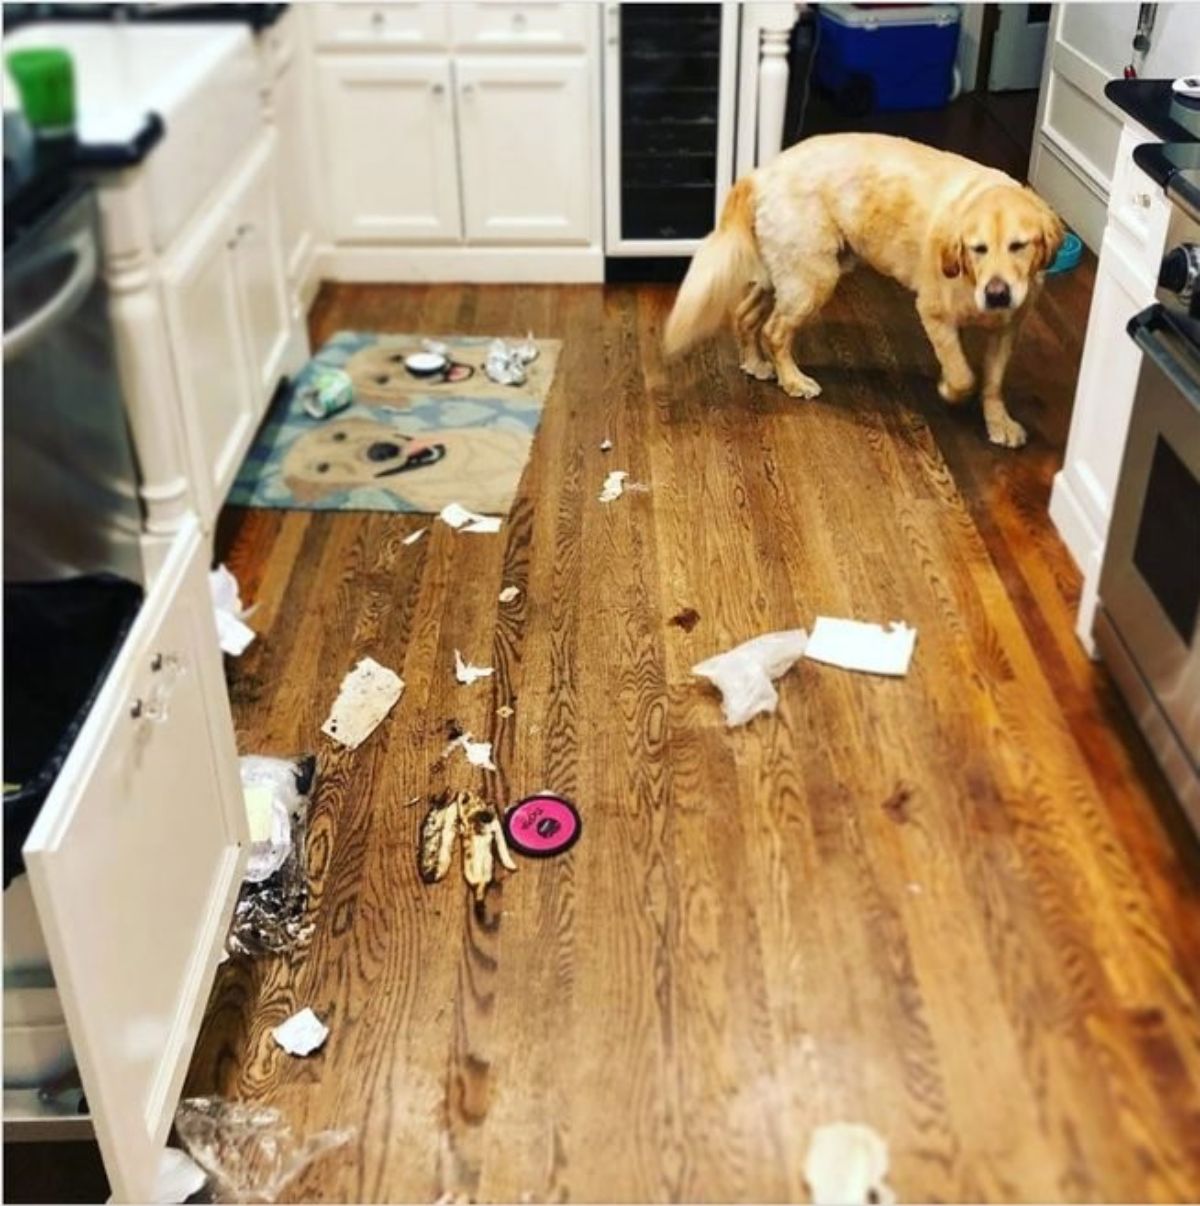 golden retriever in a kitchen with trash from the grabage strewn around the floor